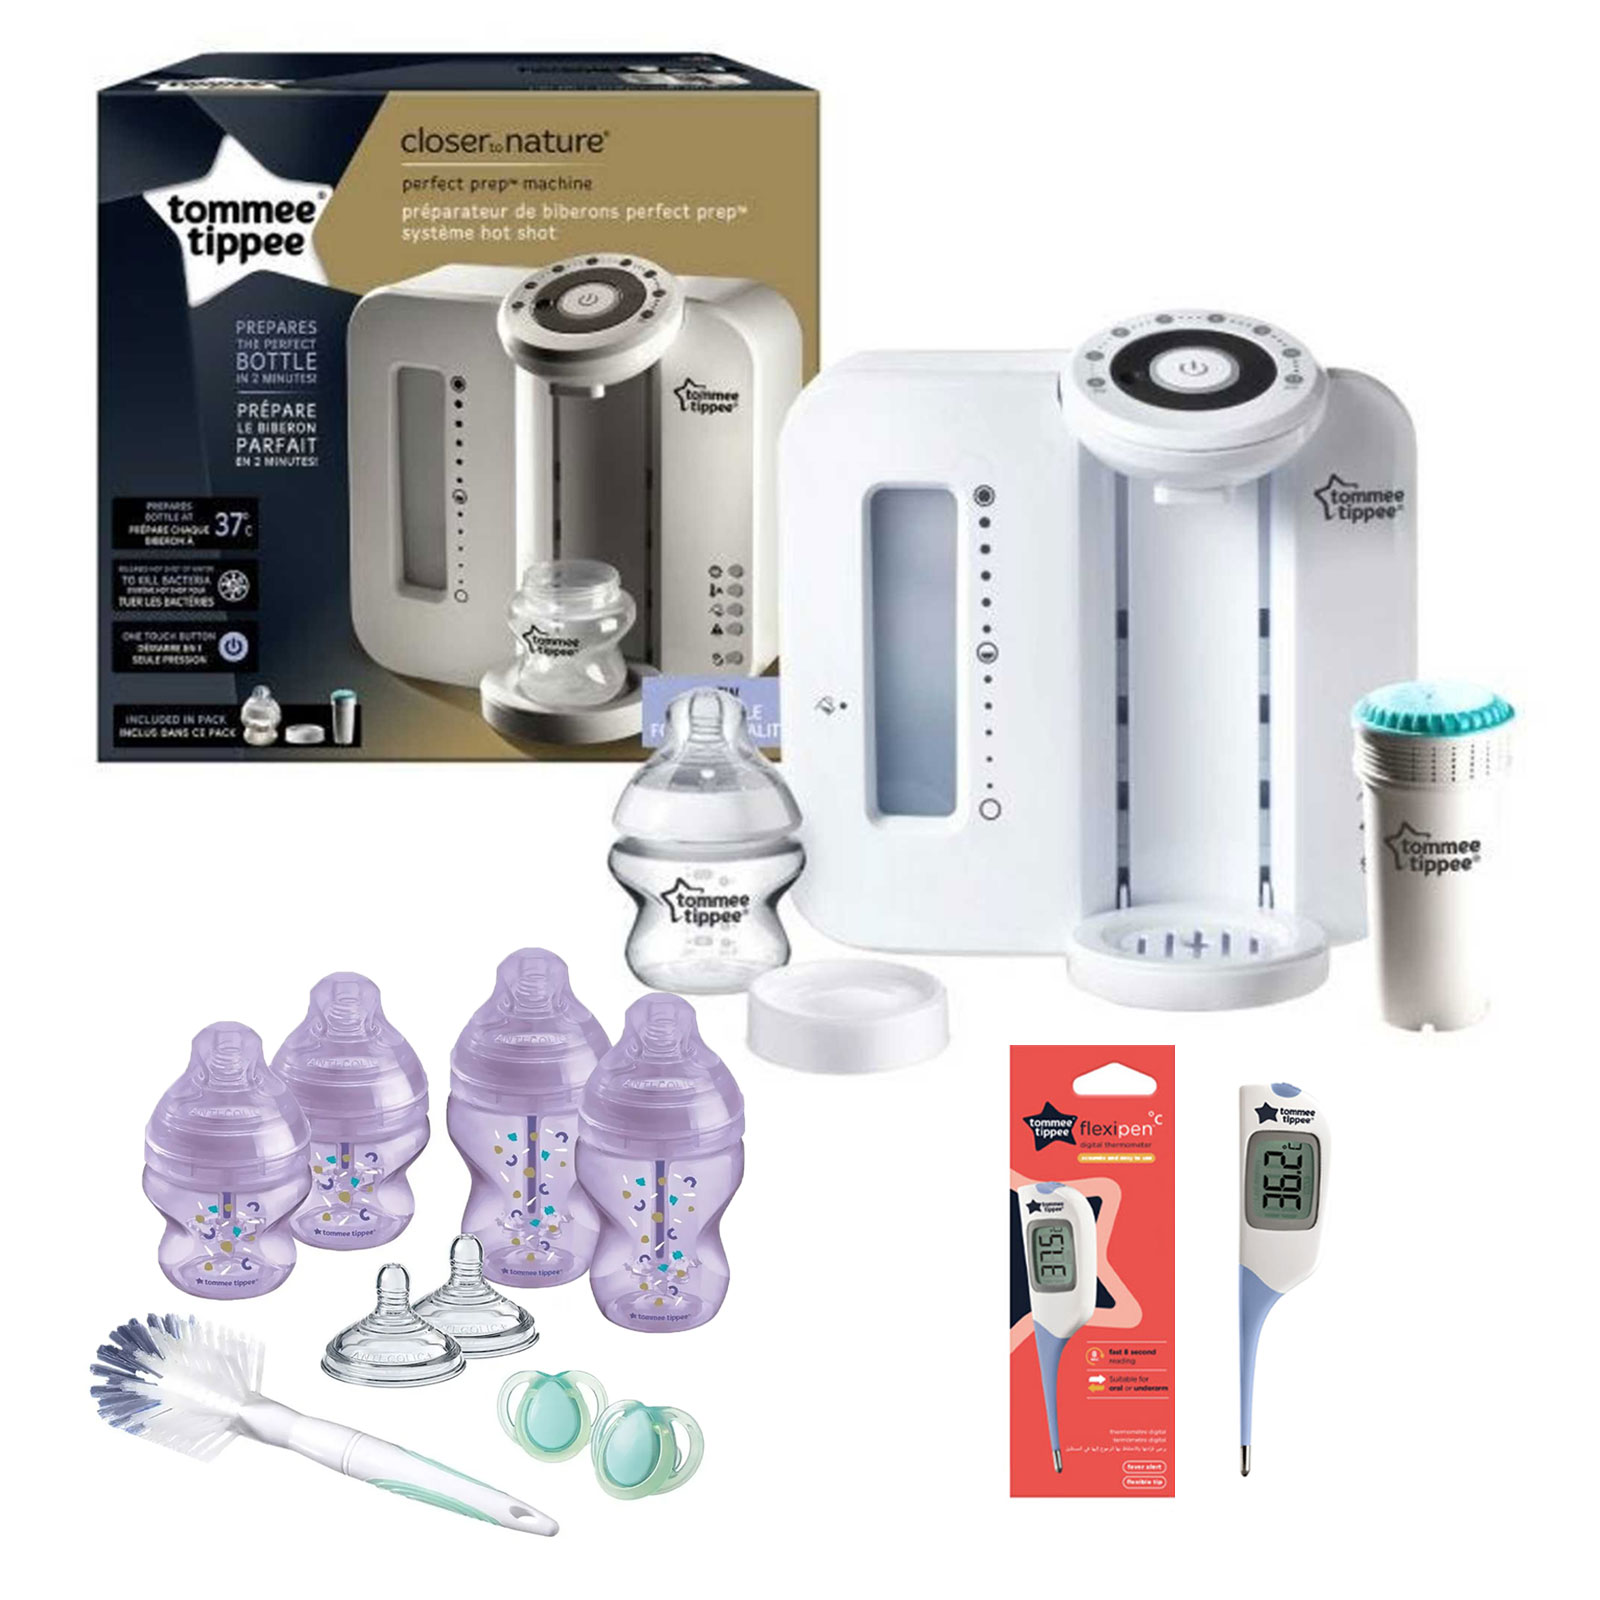 Tommee Tippee 12pc Perfect Prep Machine Anti-Colic Baby Bottle and Thermometer Feeding Bundle - White / Purple